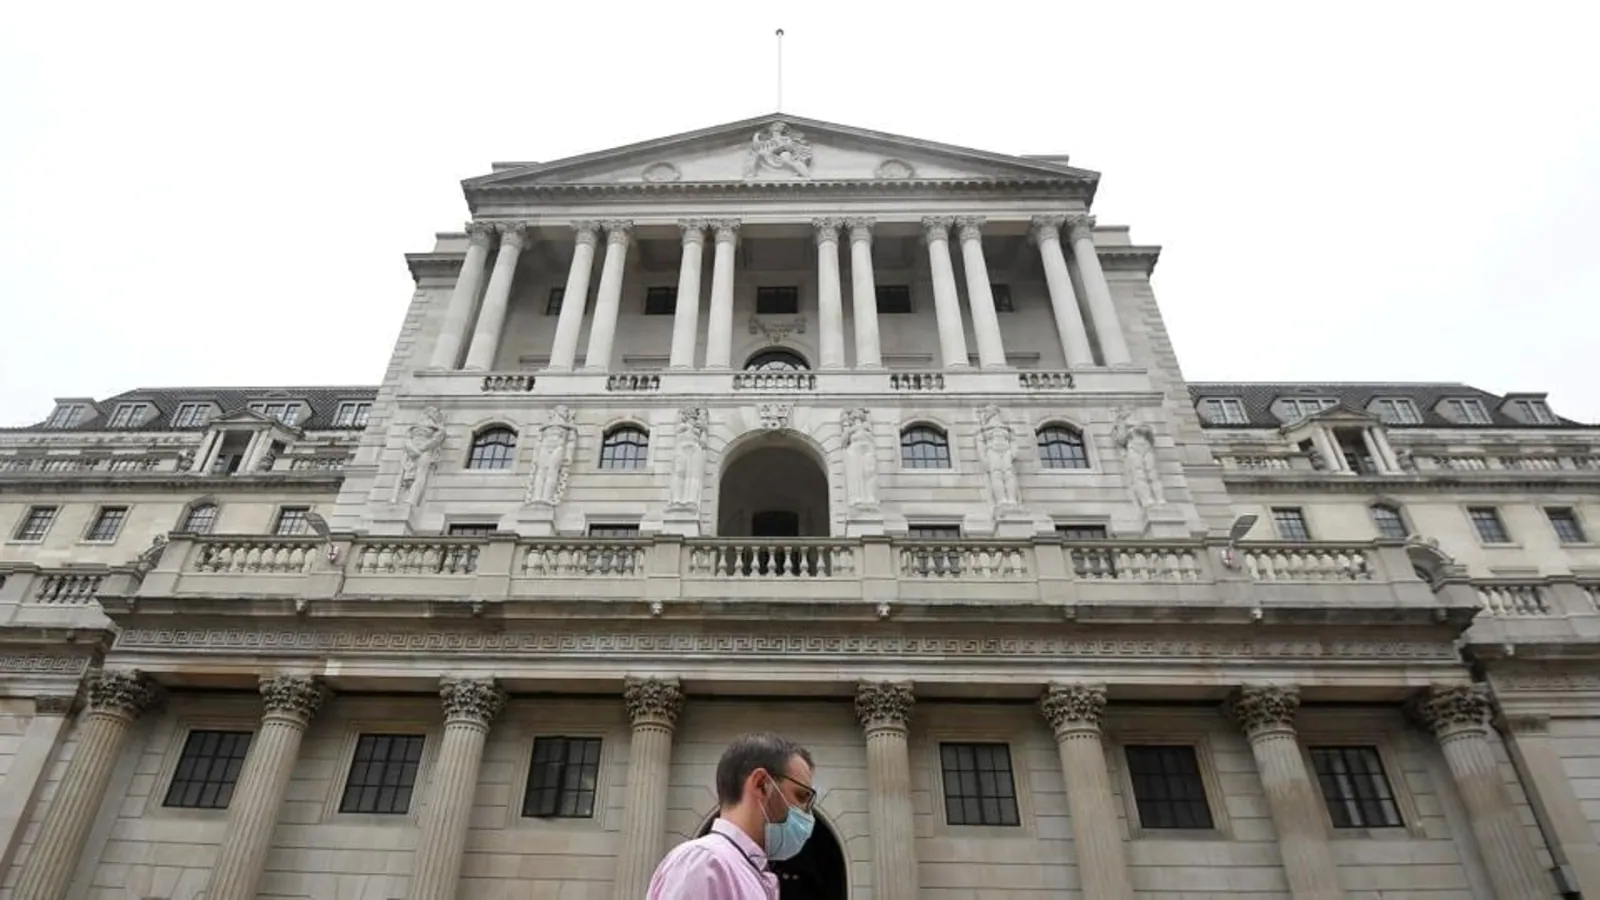 Bank of England postpones interest rates meeting by a week as UK mourns queen